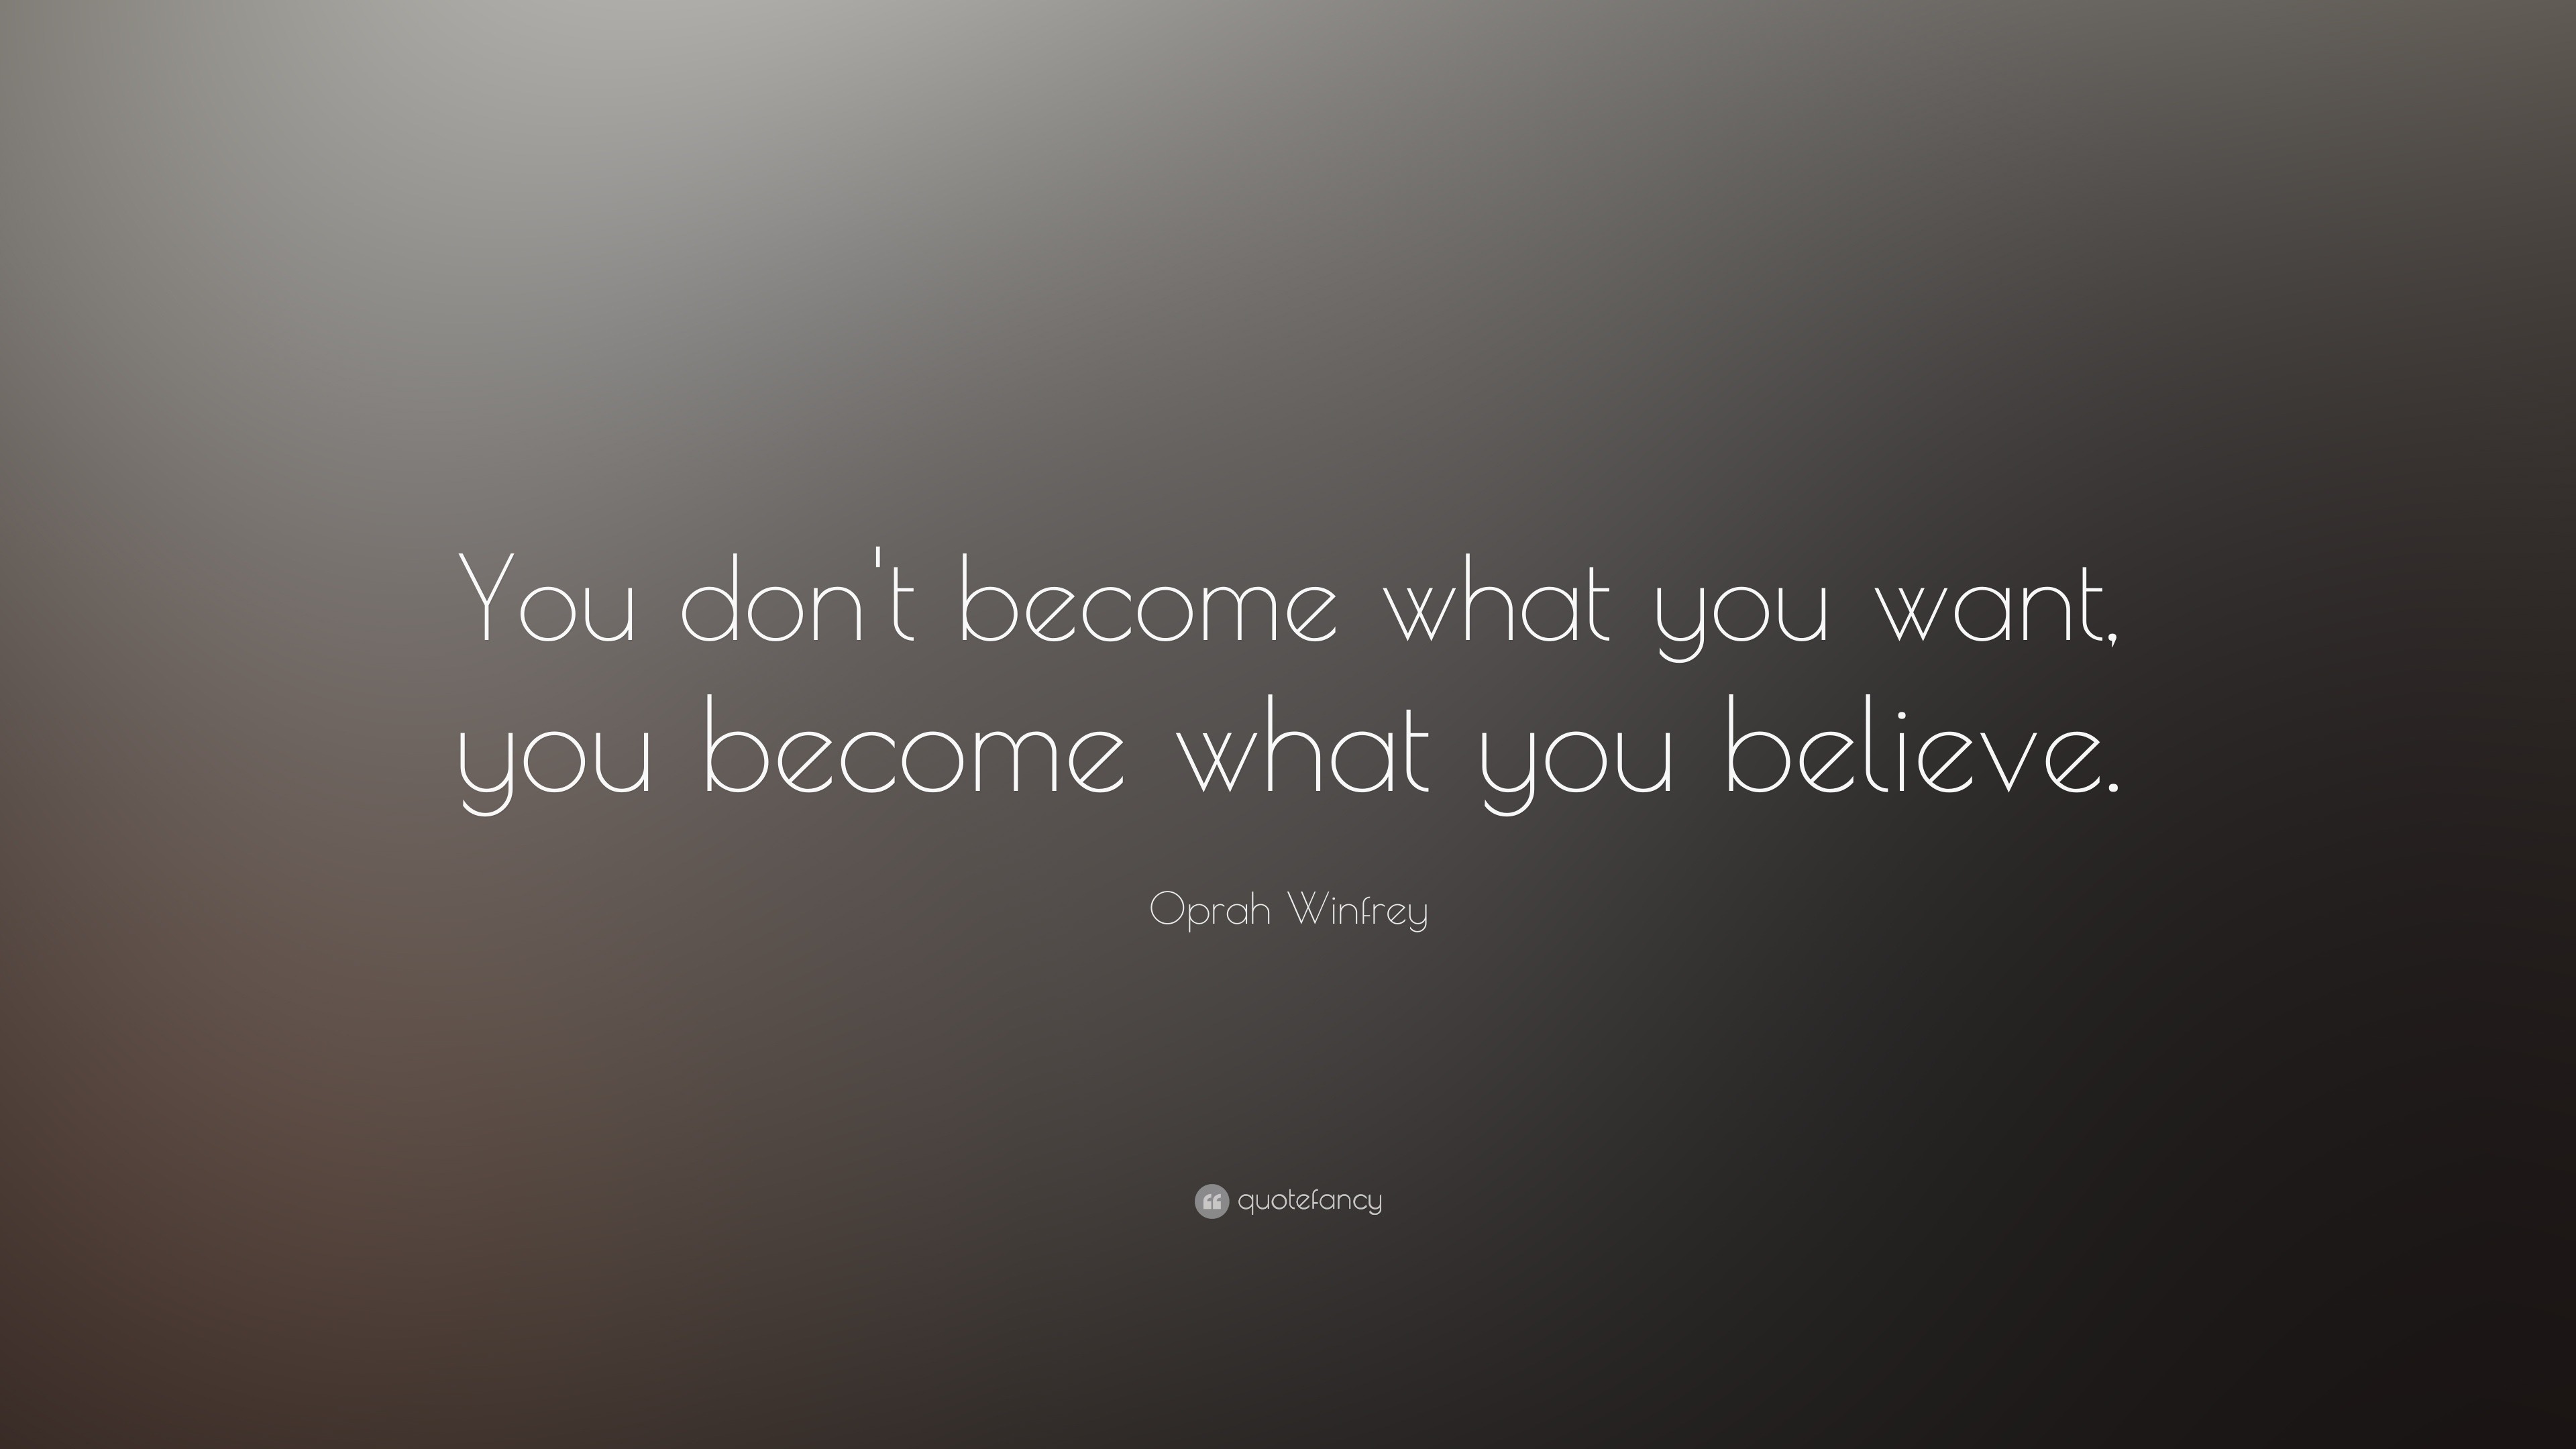 Oprah Winfrey Quote: “You don't become what you want, you become what